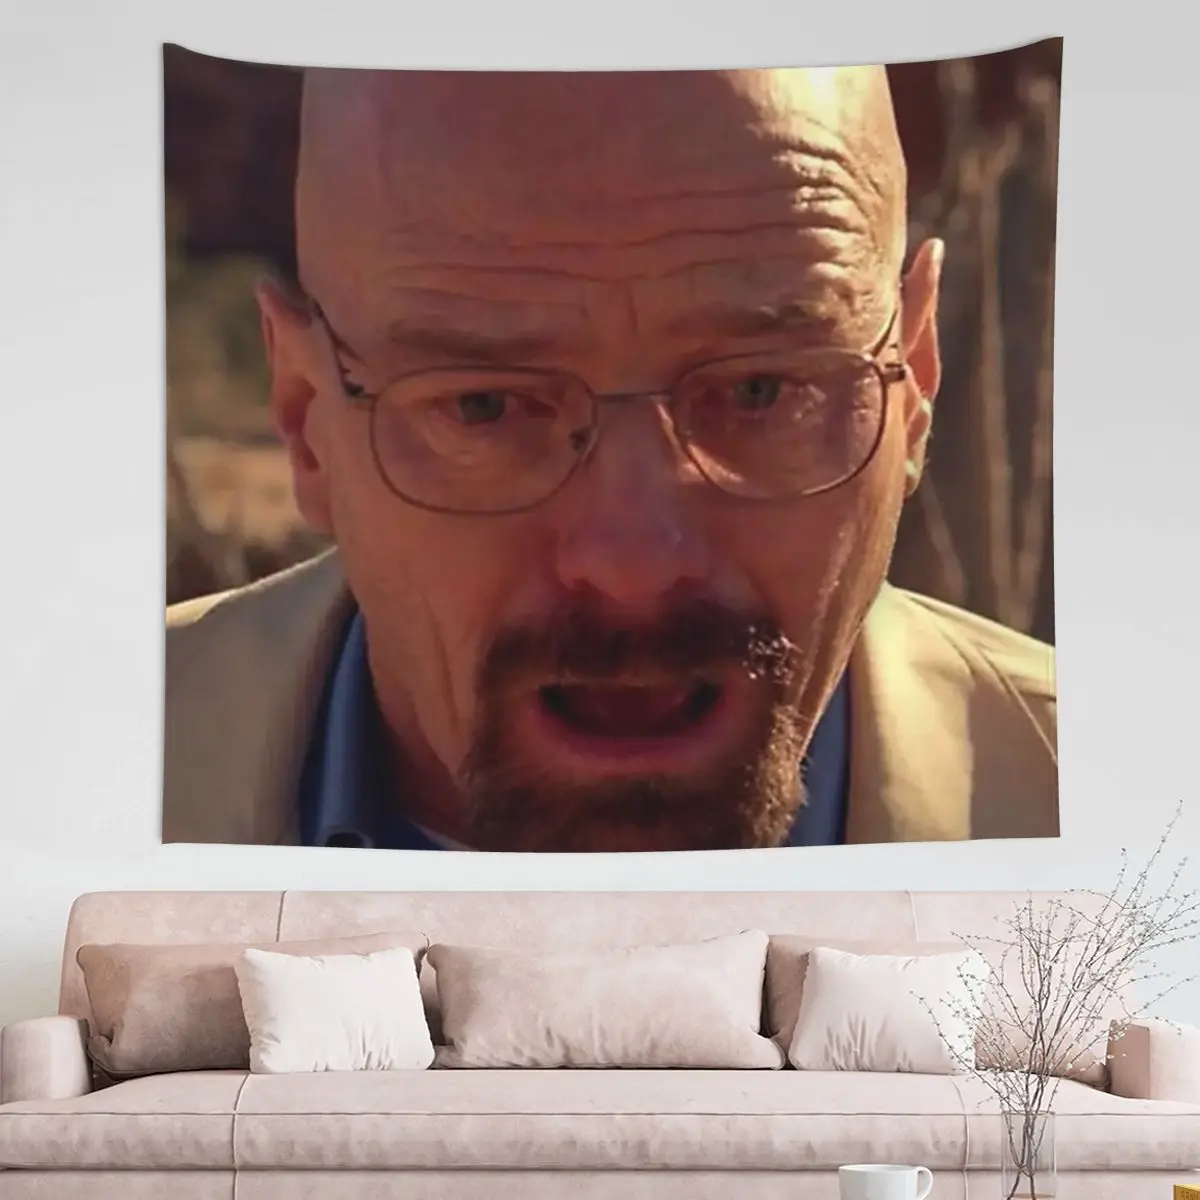 

Walter White Meme Breaking Bad Tapestry Hippie Polyester Wall Hanging Room Decor Table Cover Art Tapestries